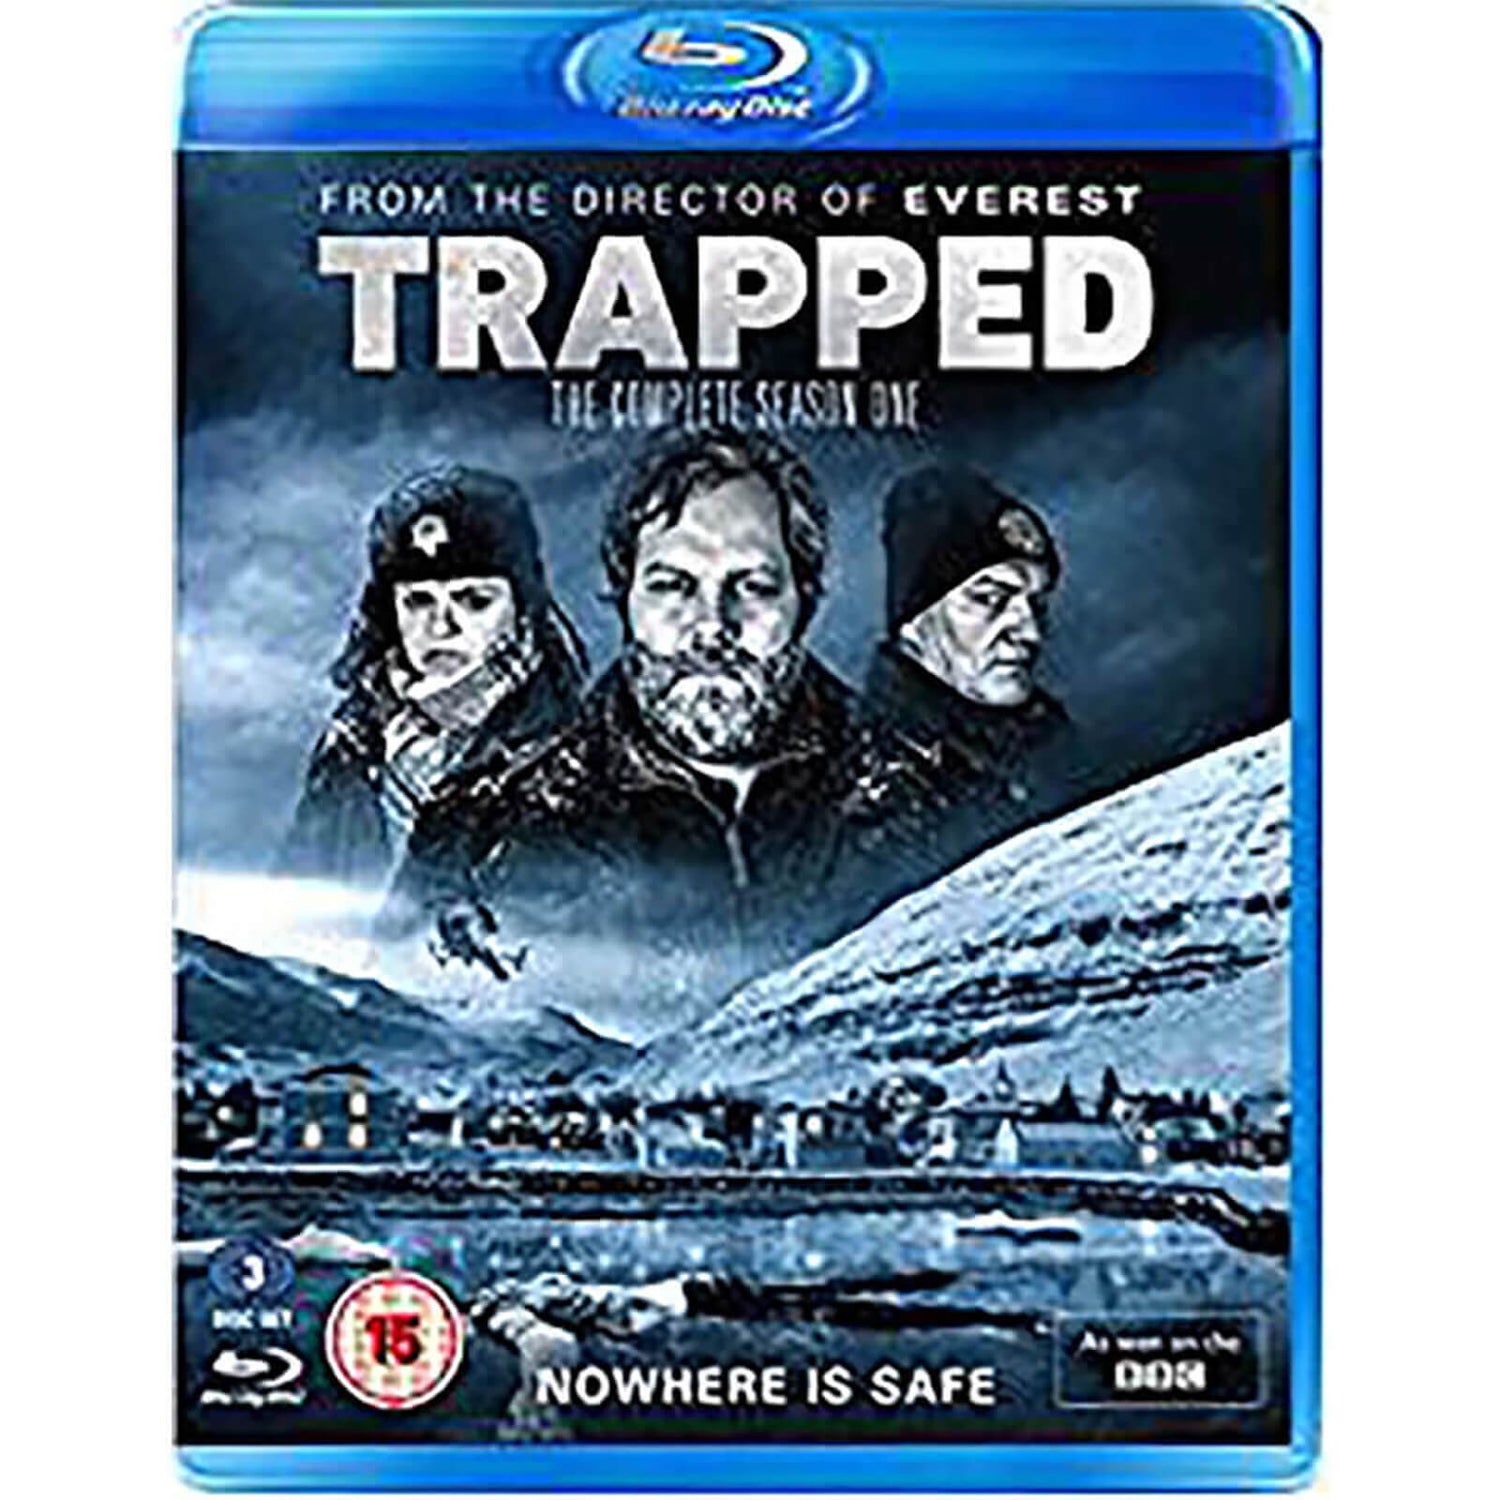 Trapped Series 1 Blu-ray